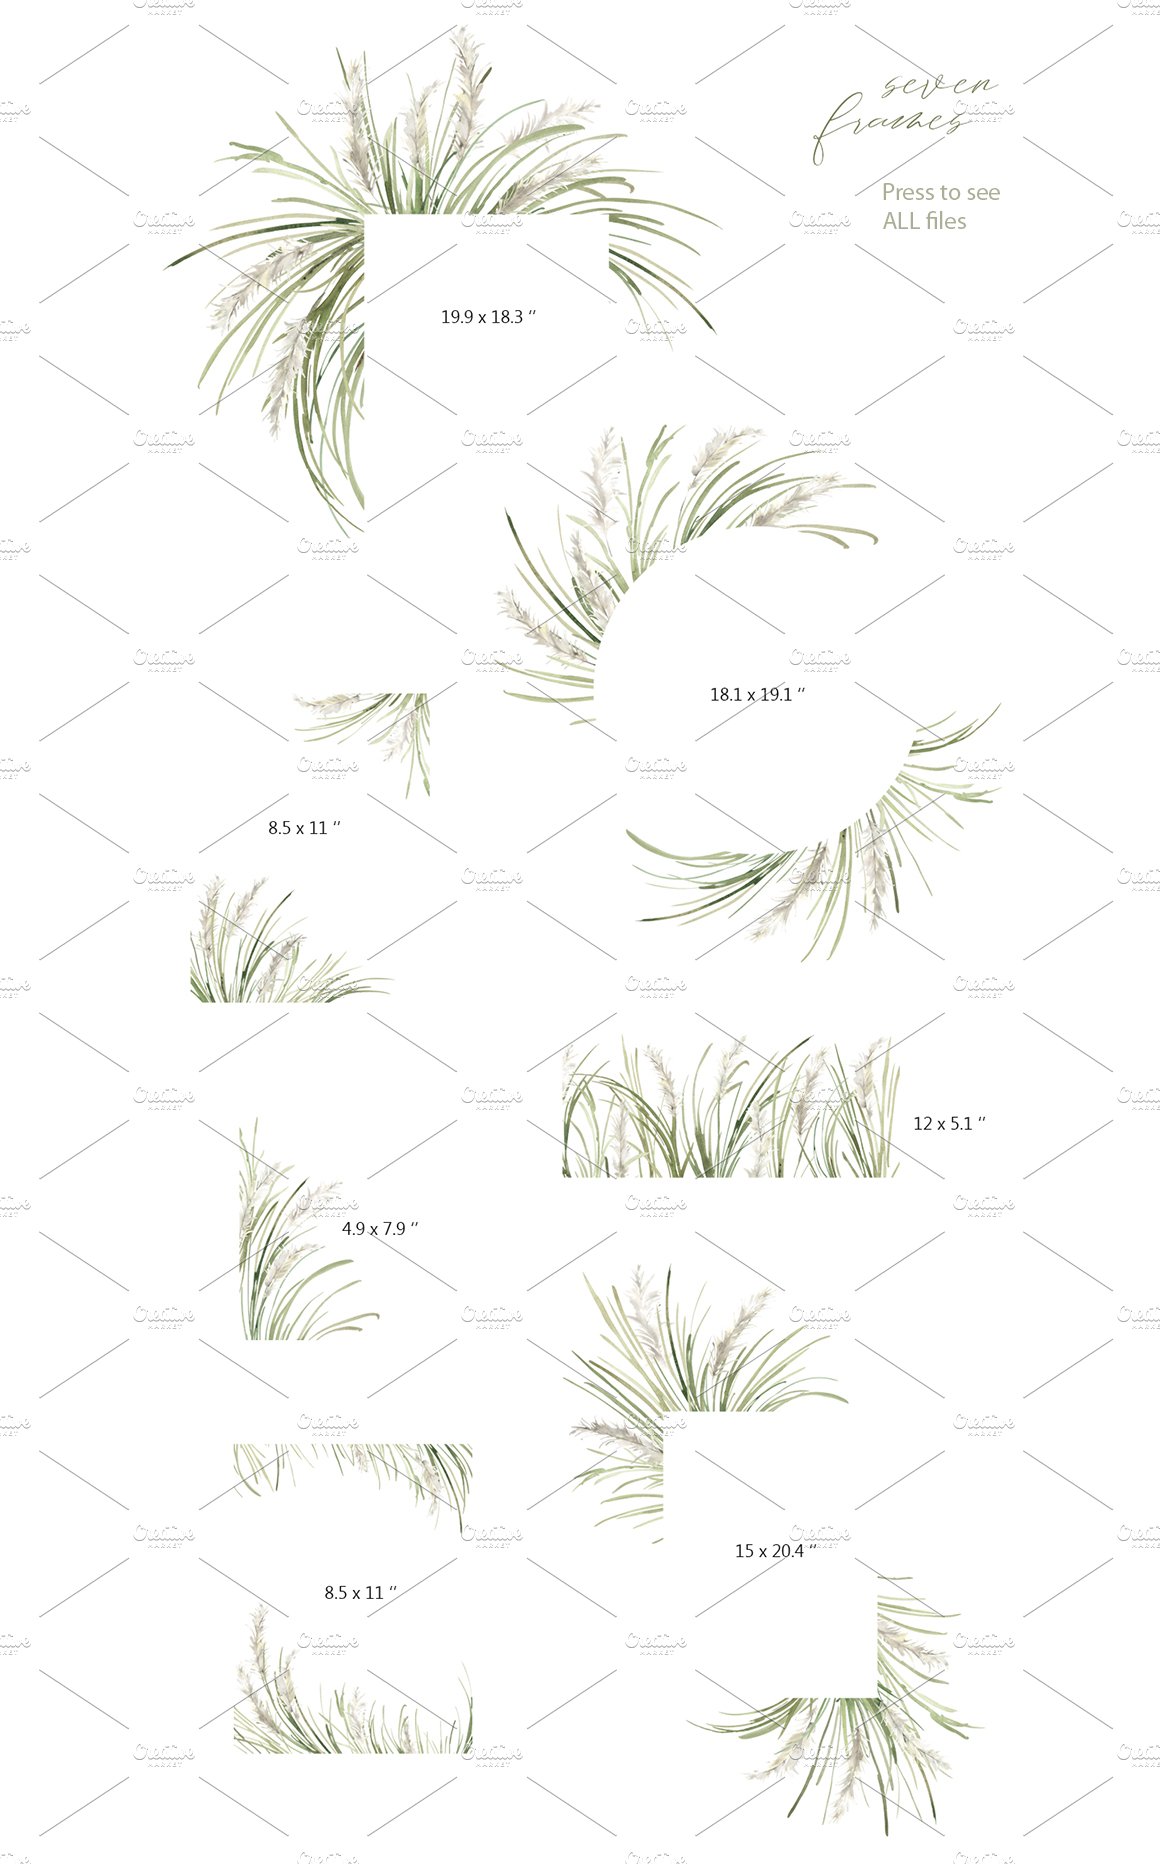 Bunch of green plants on a white background.